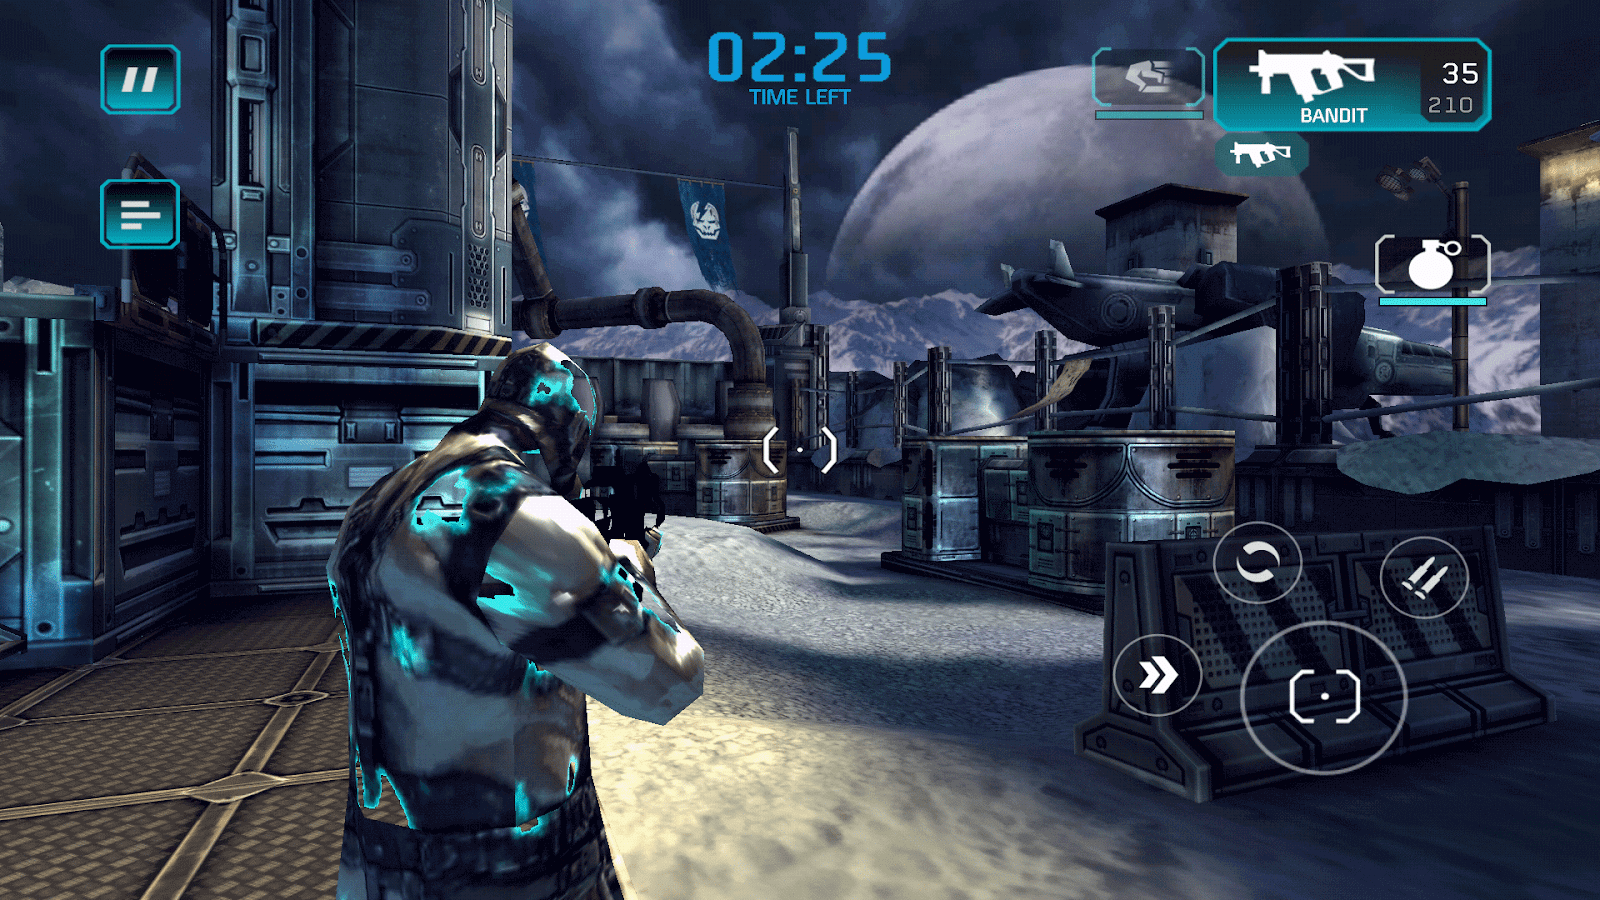 [https://game-ace.com/blog/best-android-games-with-unity/](https://game-ace.com/blog/best-android-games-with-unity/)